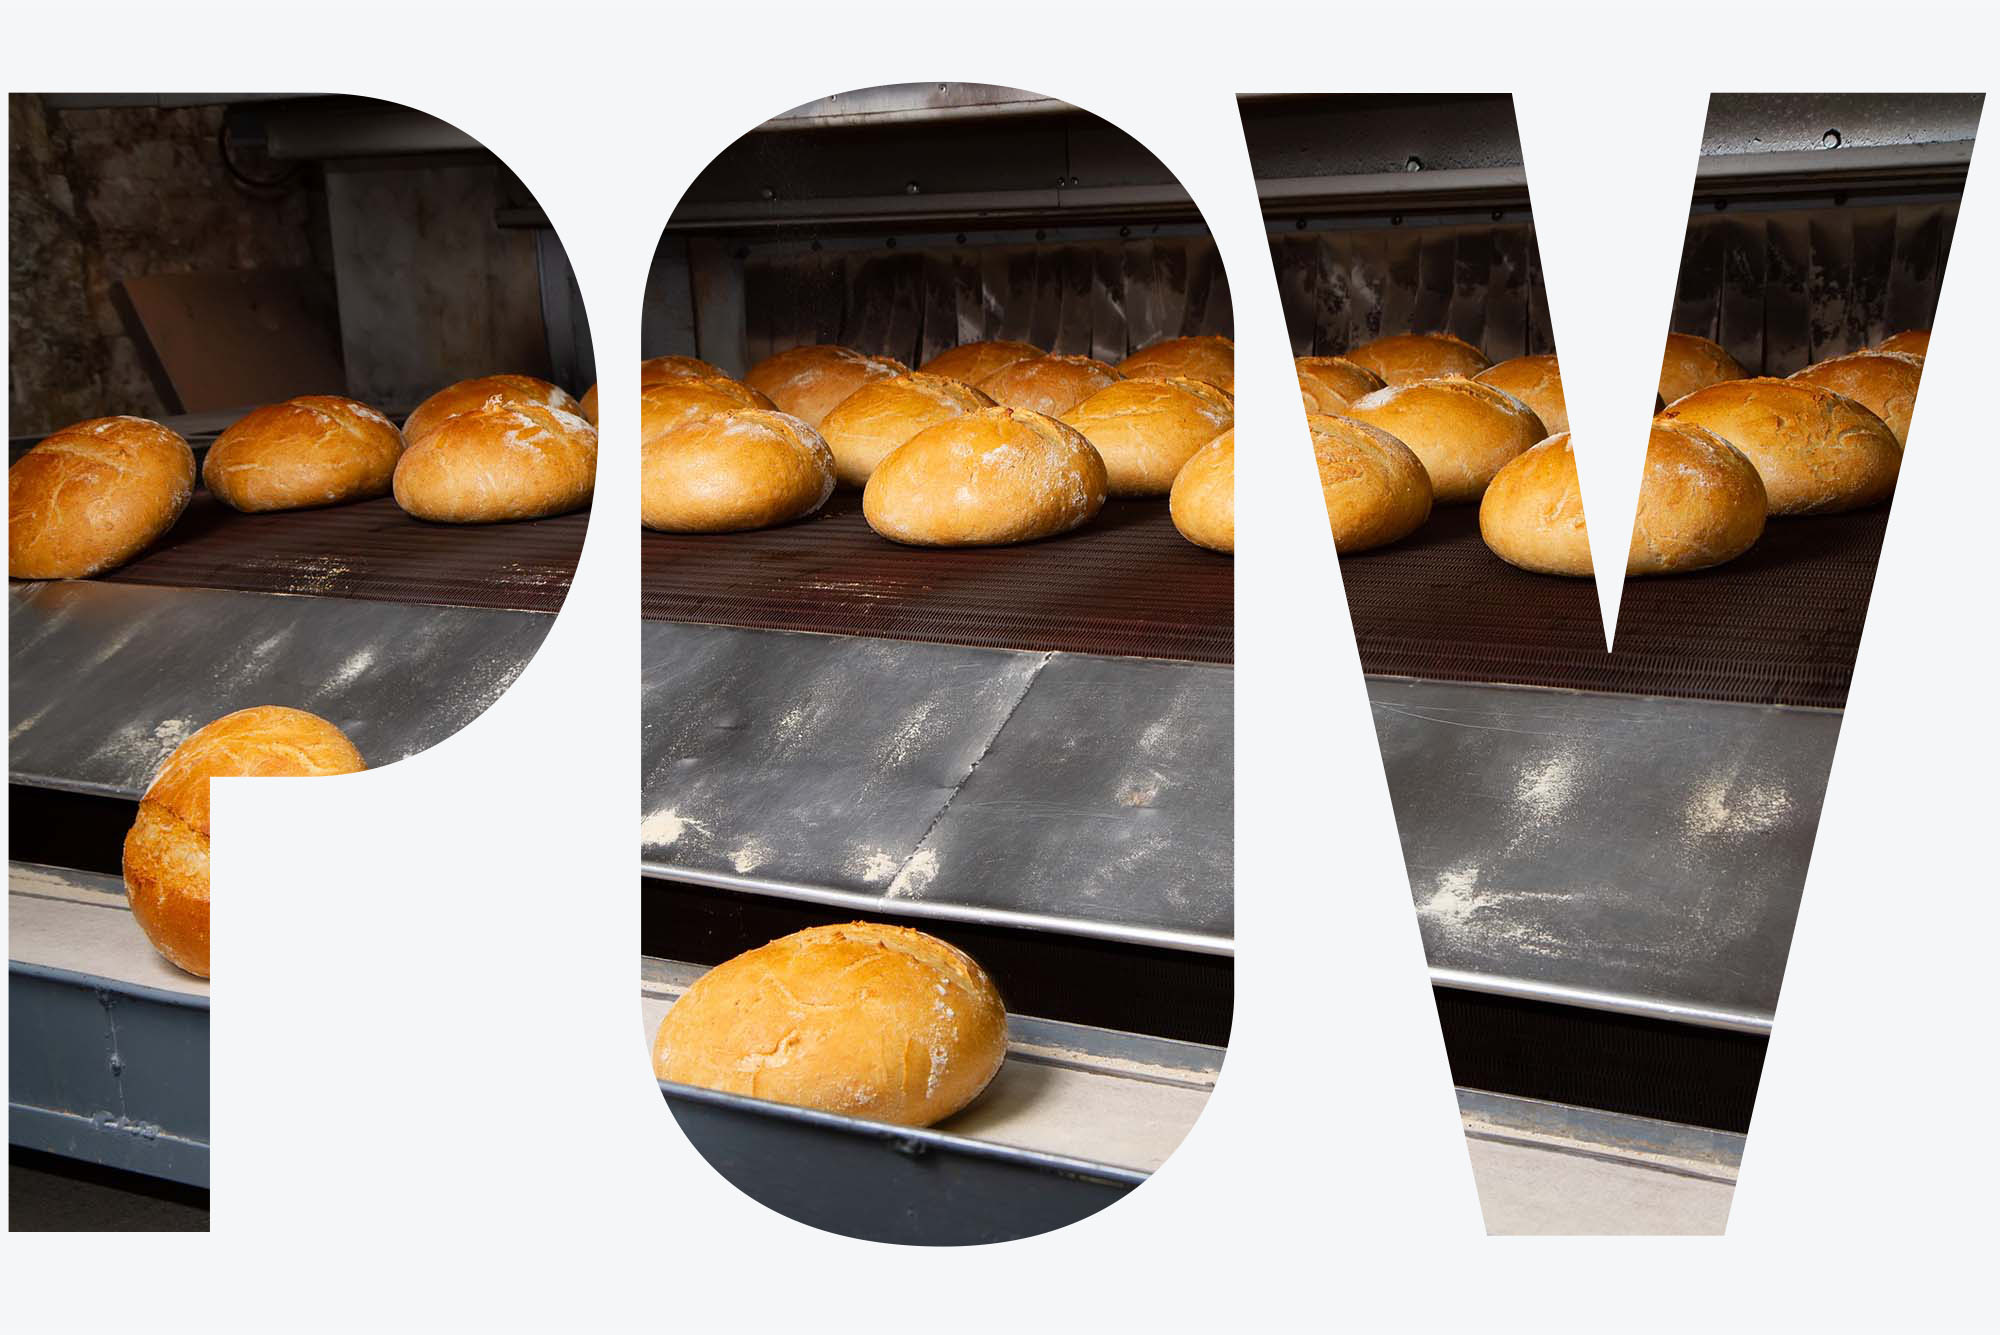 Photo: A picture of buns in an industrial-style oven. The overlay has the letters "POV"